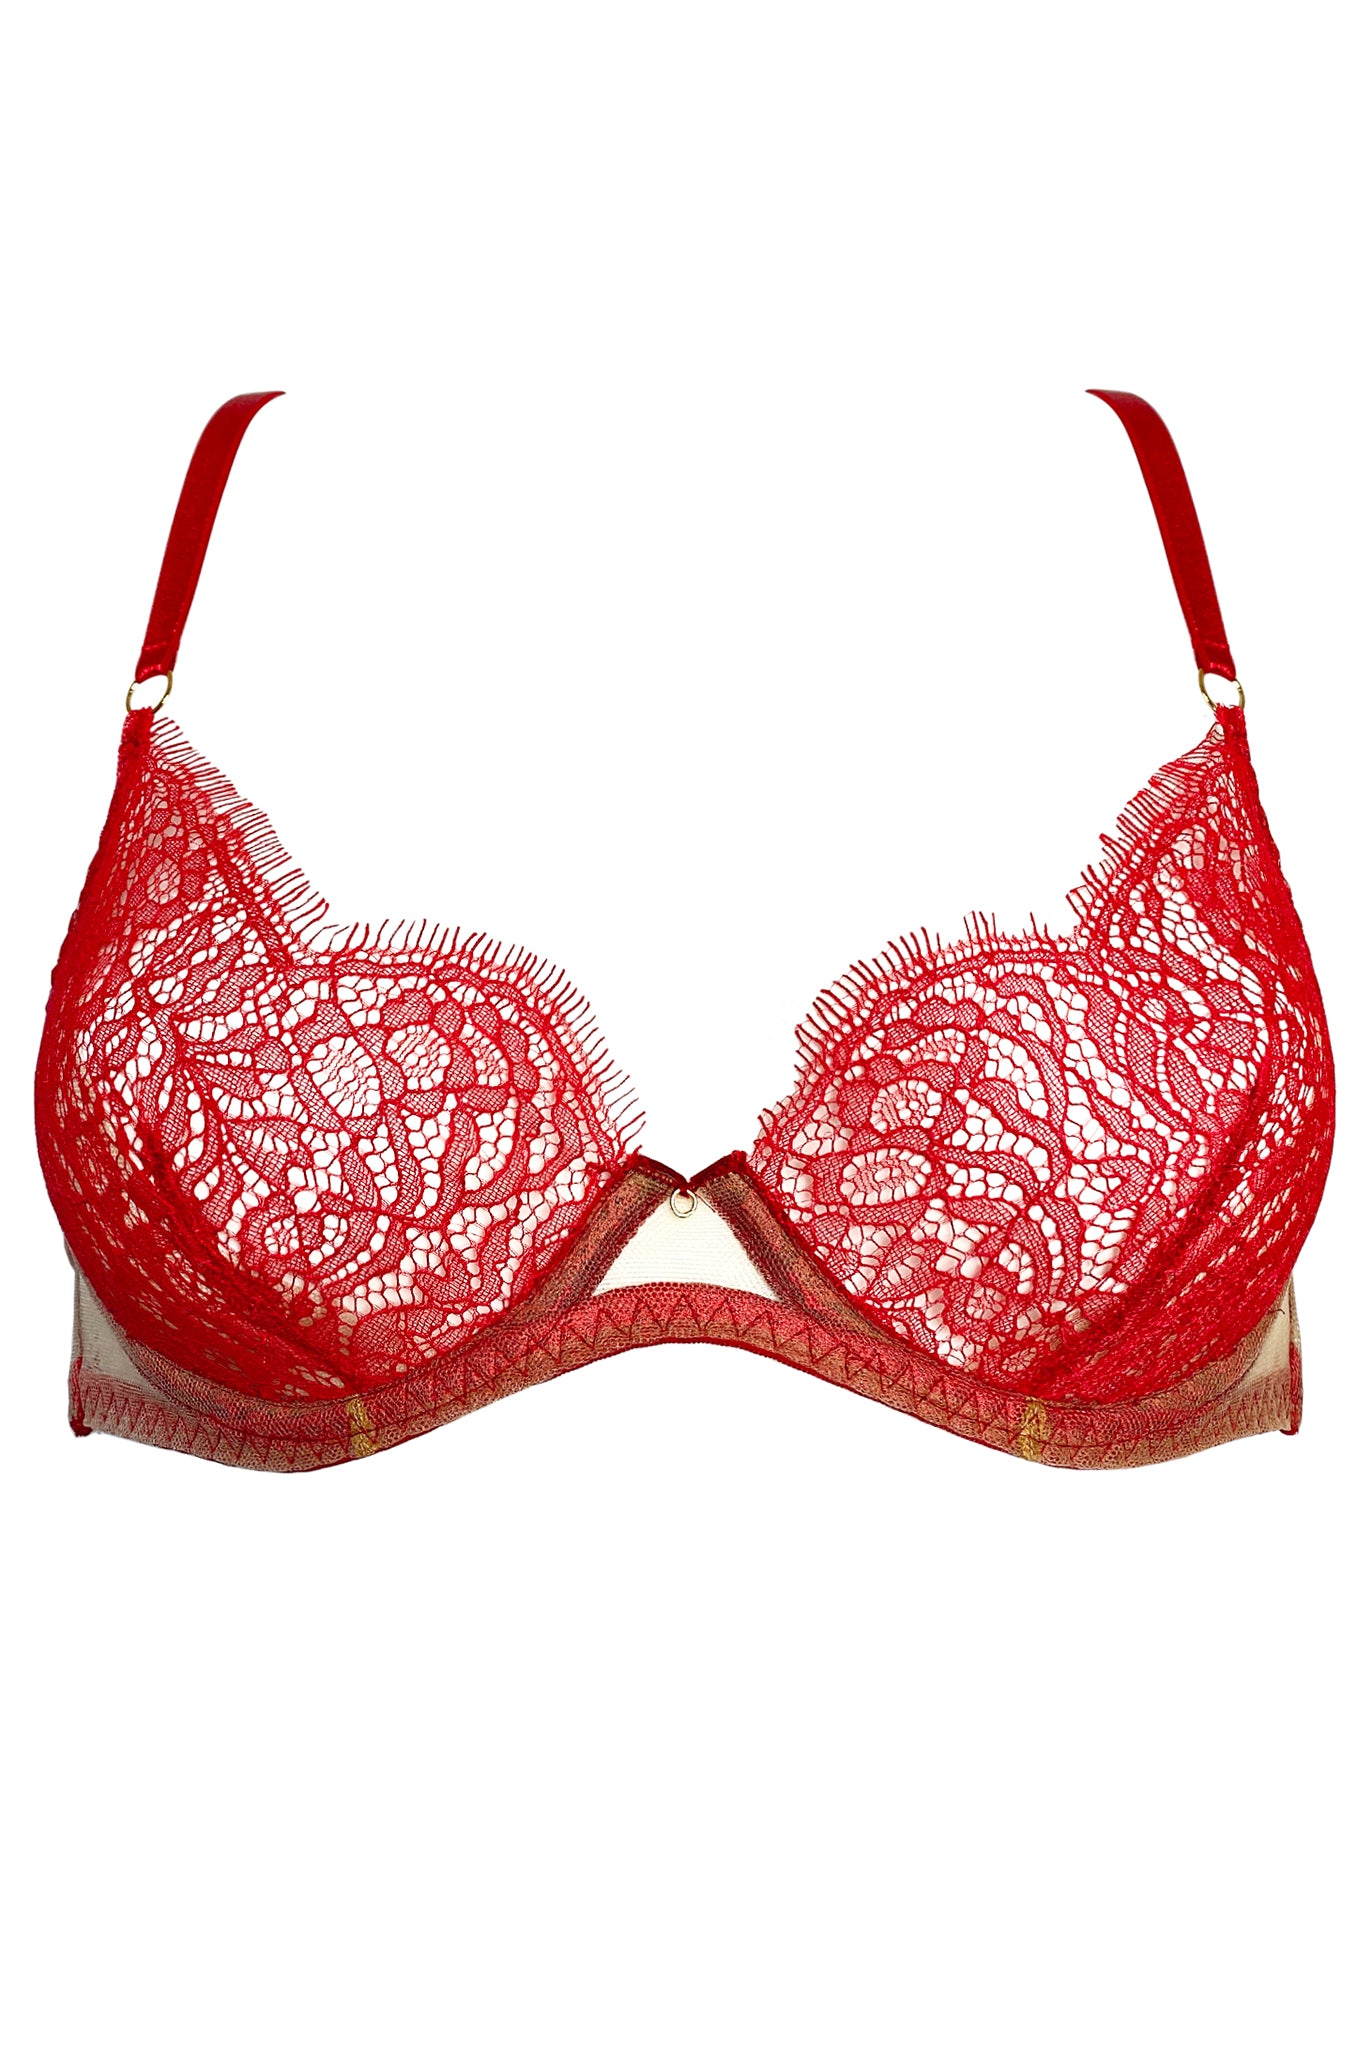 Womens Red Lace Lingerie Set size medium - beyond exchange